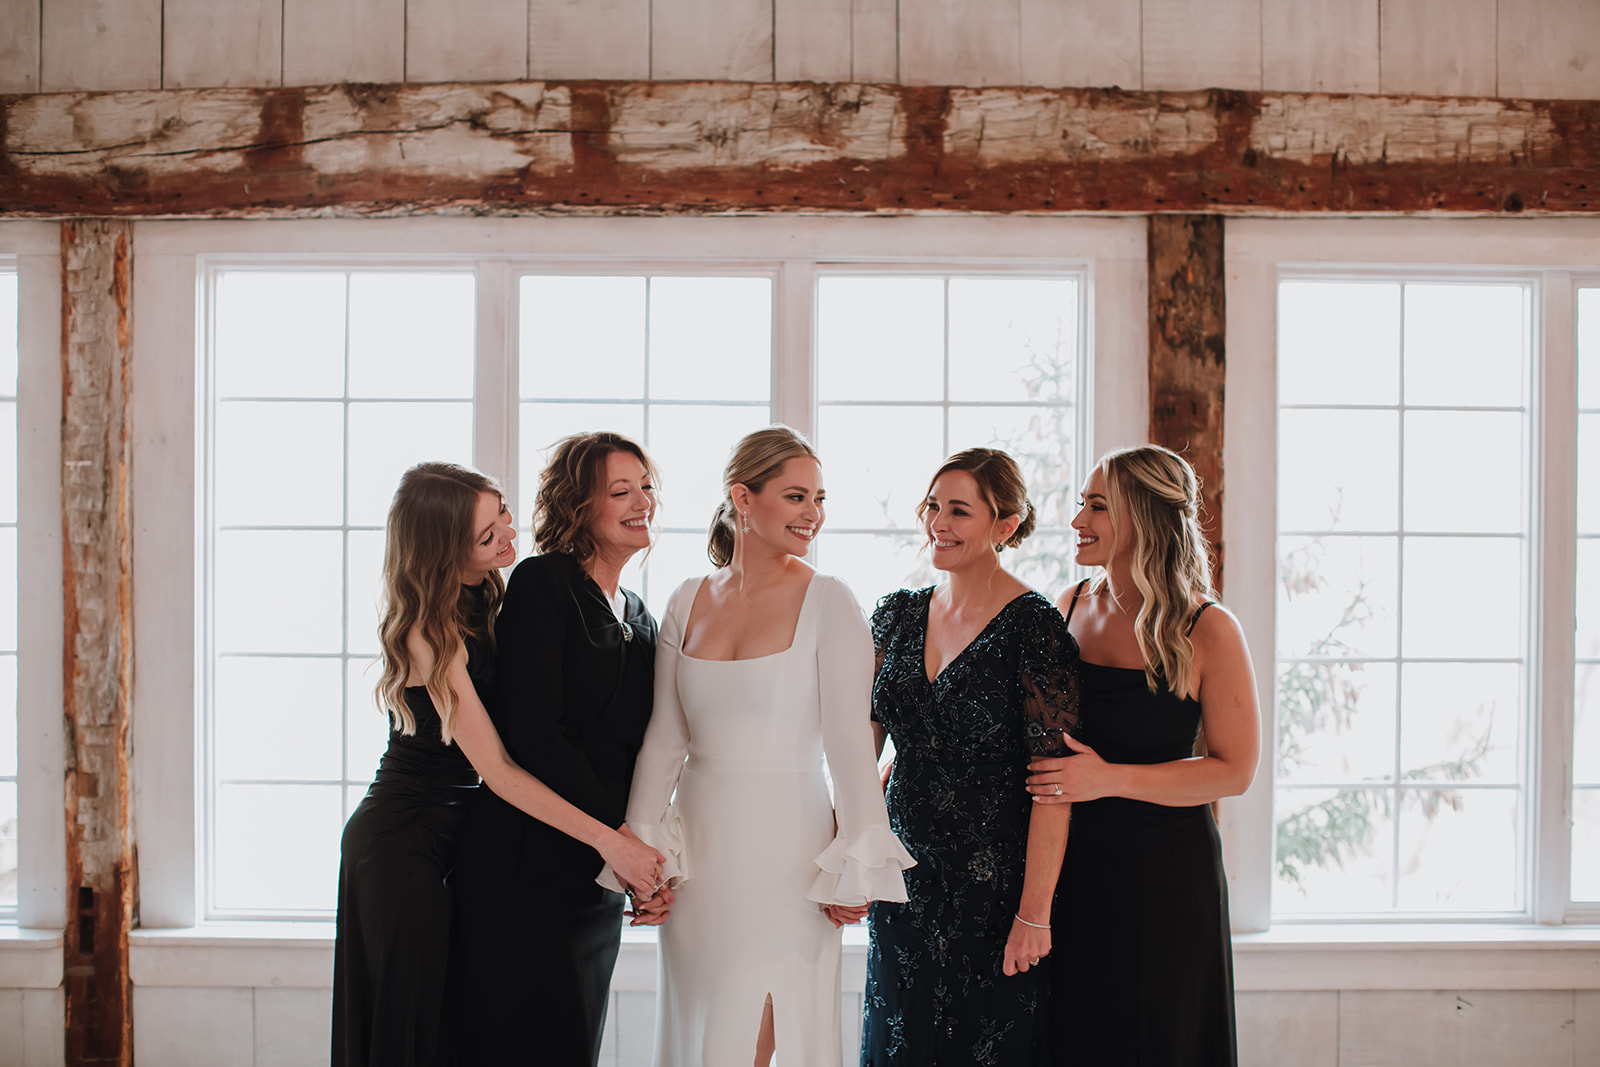 Bride and her bridesmaids posing together in the bridal suite